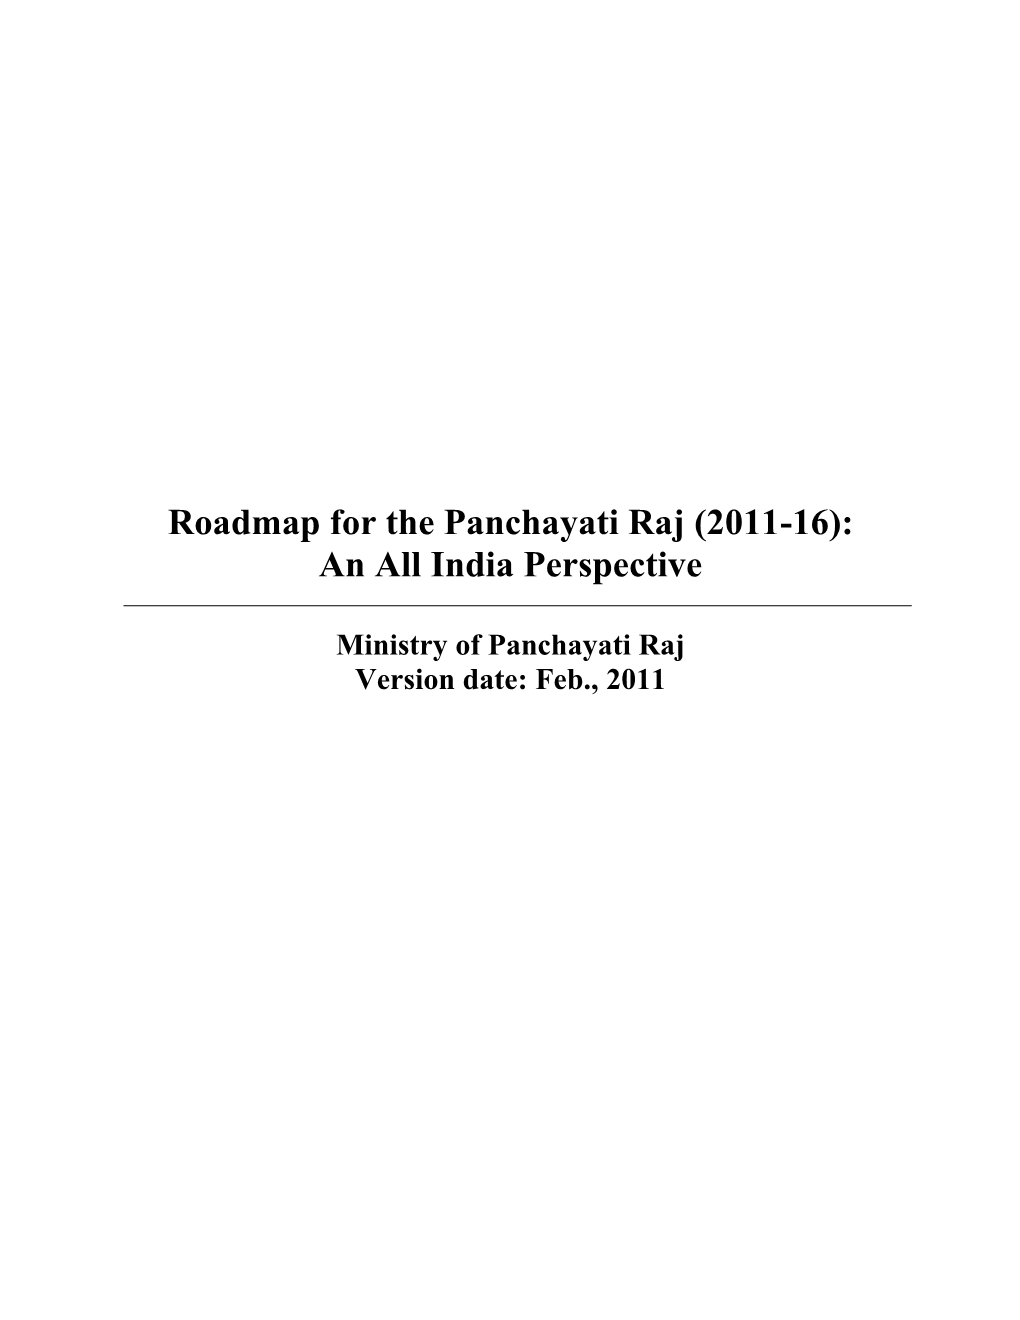 Roadmap for the Panchayati Raj (2011-16): an All India Perspective